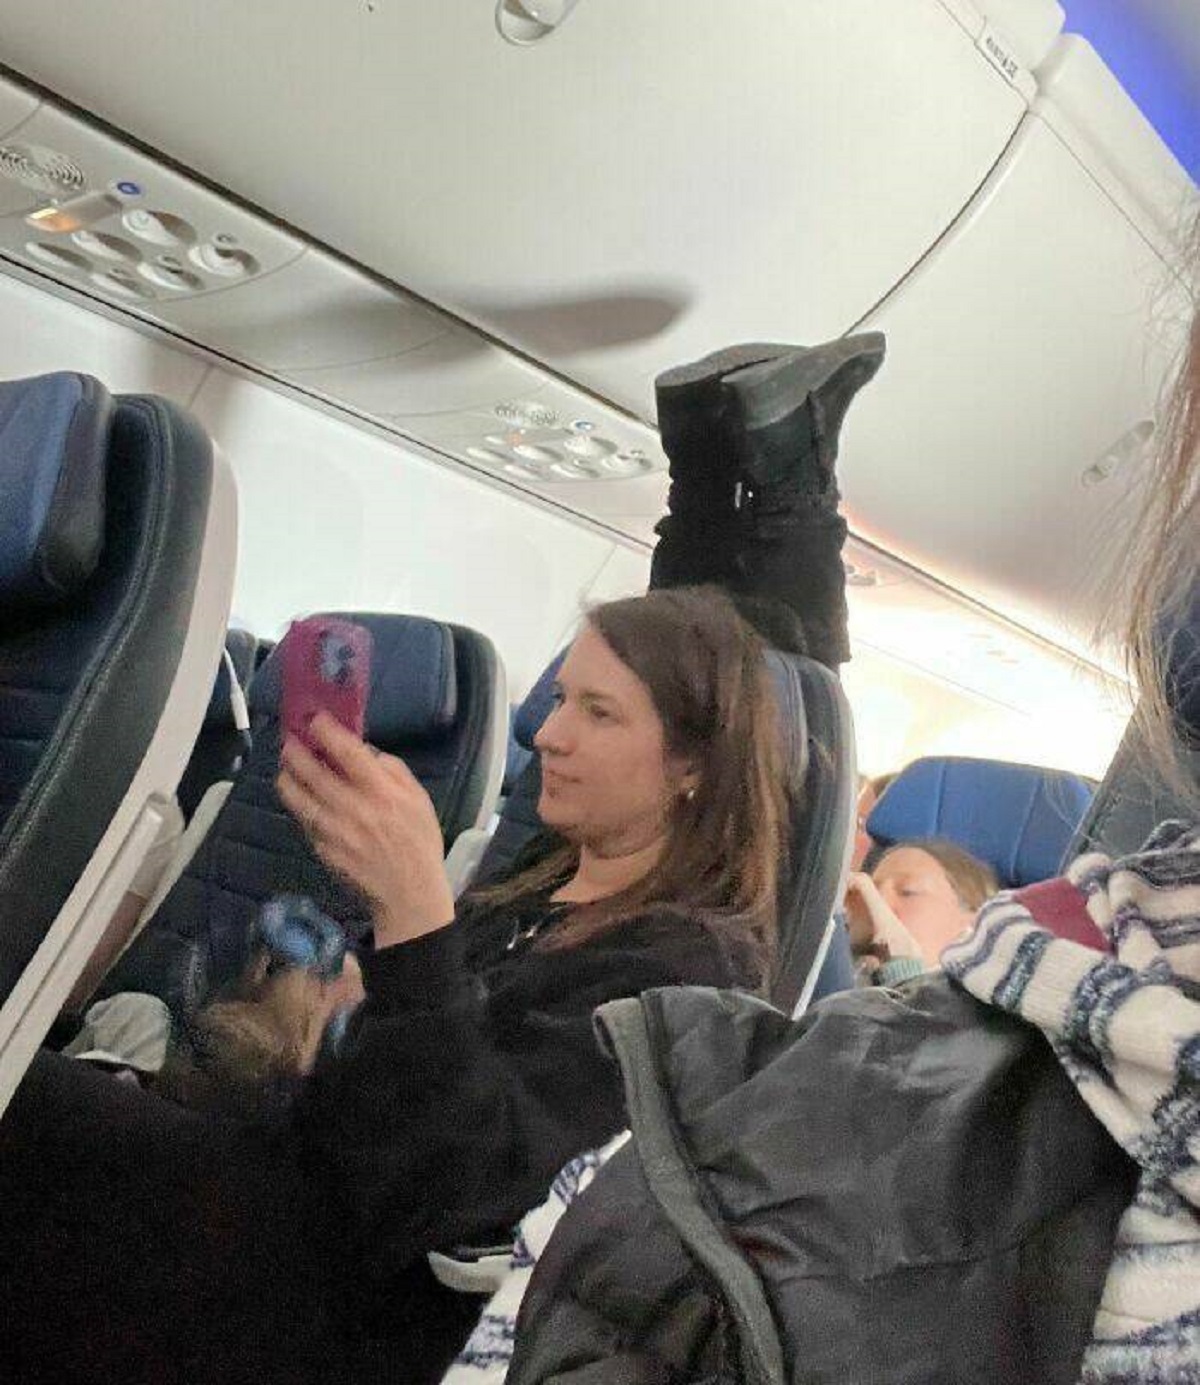 "Today On A Flight From Philadelphia To Denver. That’s My Sister In Front Of Her"